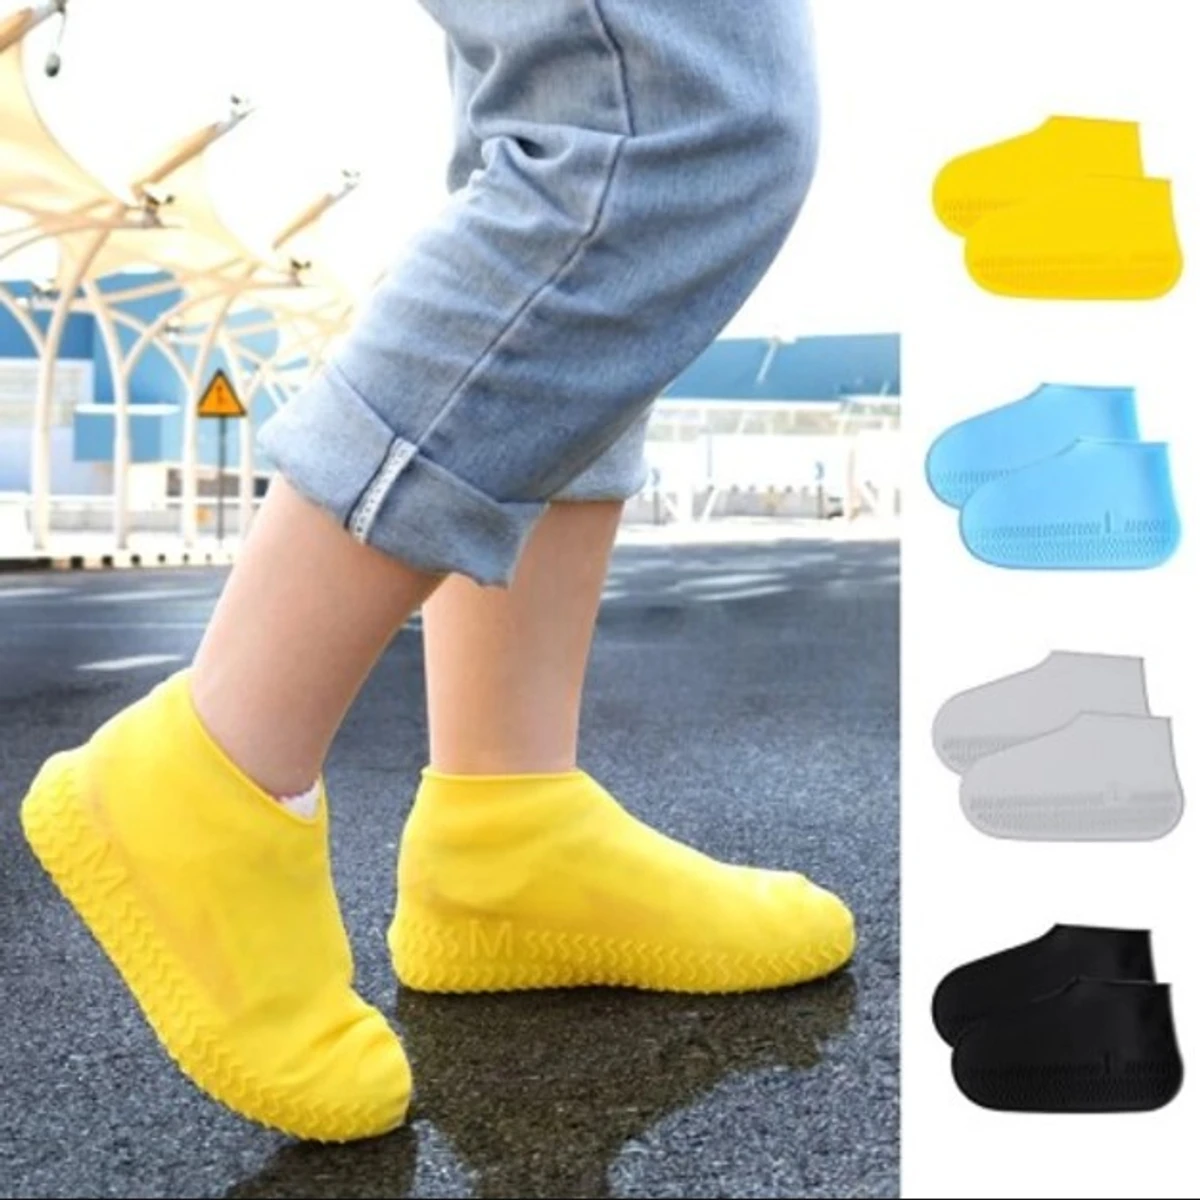 Boots Silicone WATERPROOF SHOE COVER Reusable Rain Shoe Covers